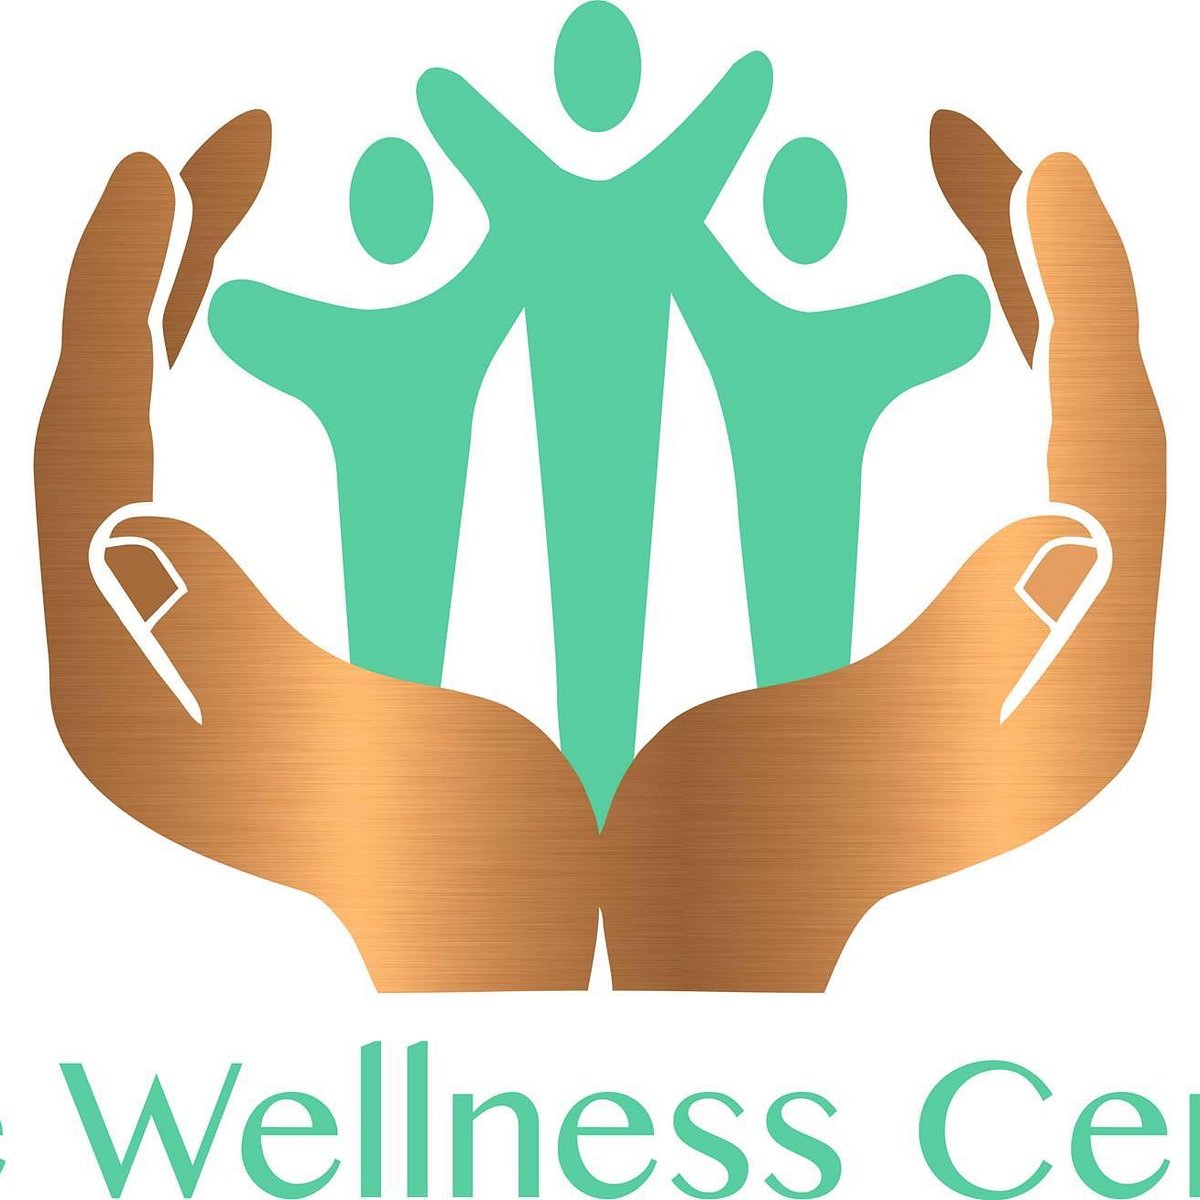 The Wellness Centre Sowerby Bridge All You Need To Know Before You Go